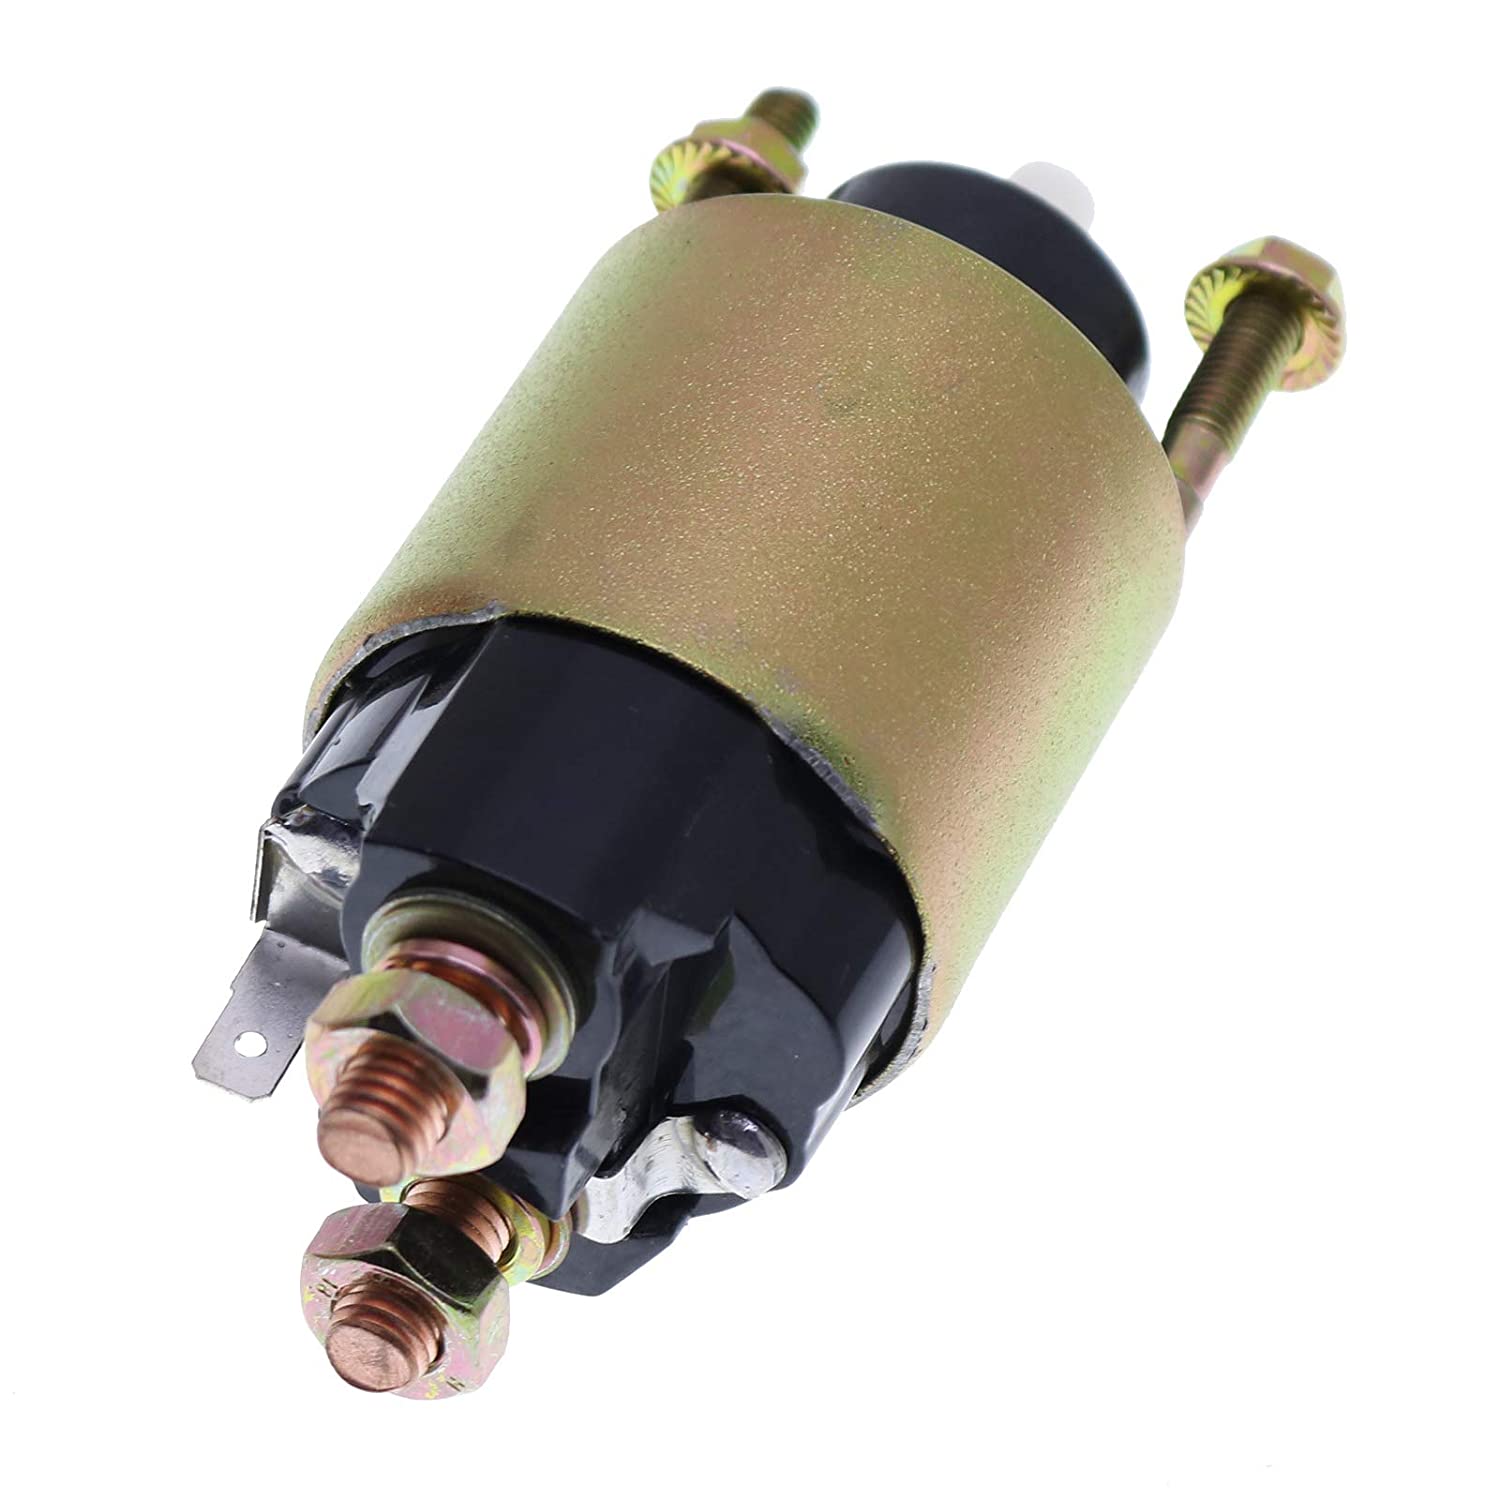 12V 3 Terminals Starter Motor Solenoid Relay Compatible with John Deere Gator AM102577 165 2243 285 325 345 425 GT262 GT265 GT2275 LX176 LX178 LX188 - KUDUPARTS